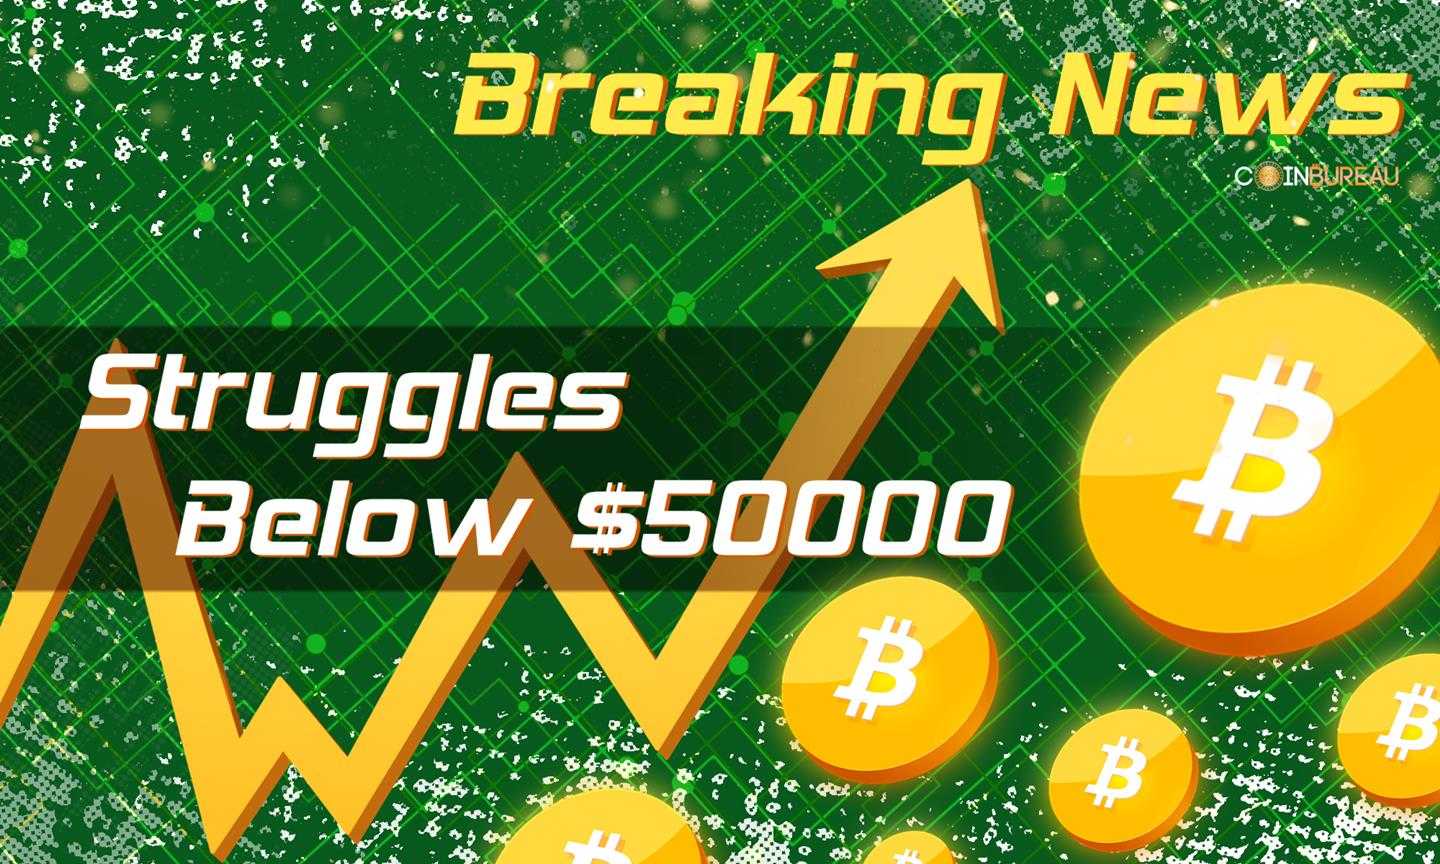 Time For a Bitcoin Rally? BTC Struggles Below $50k As Analysts Debate What’s Next